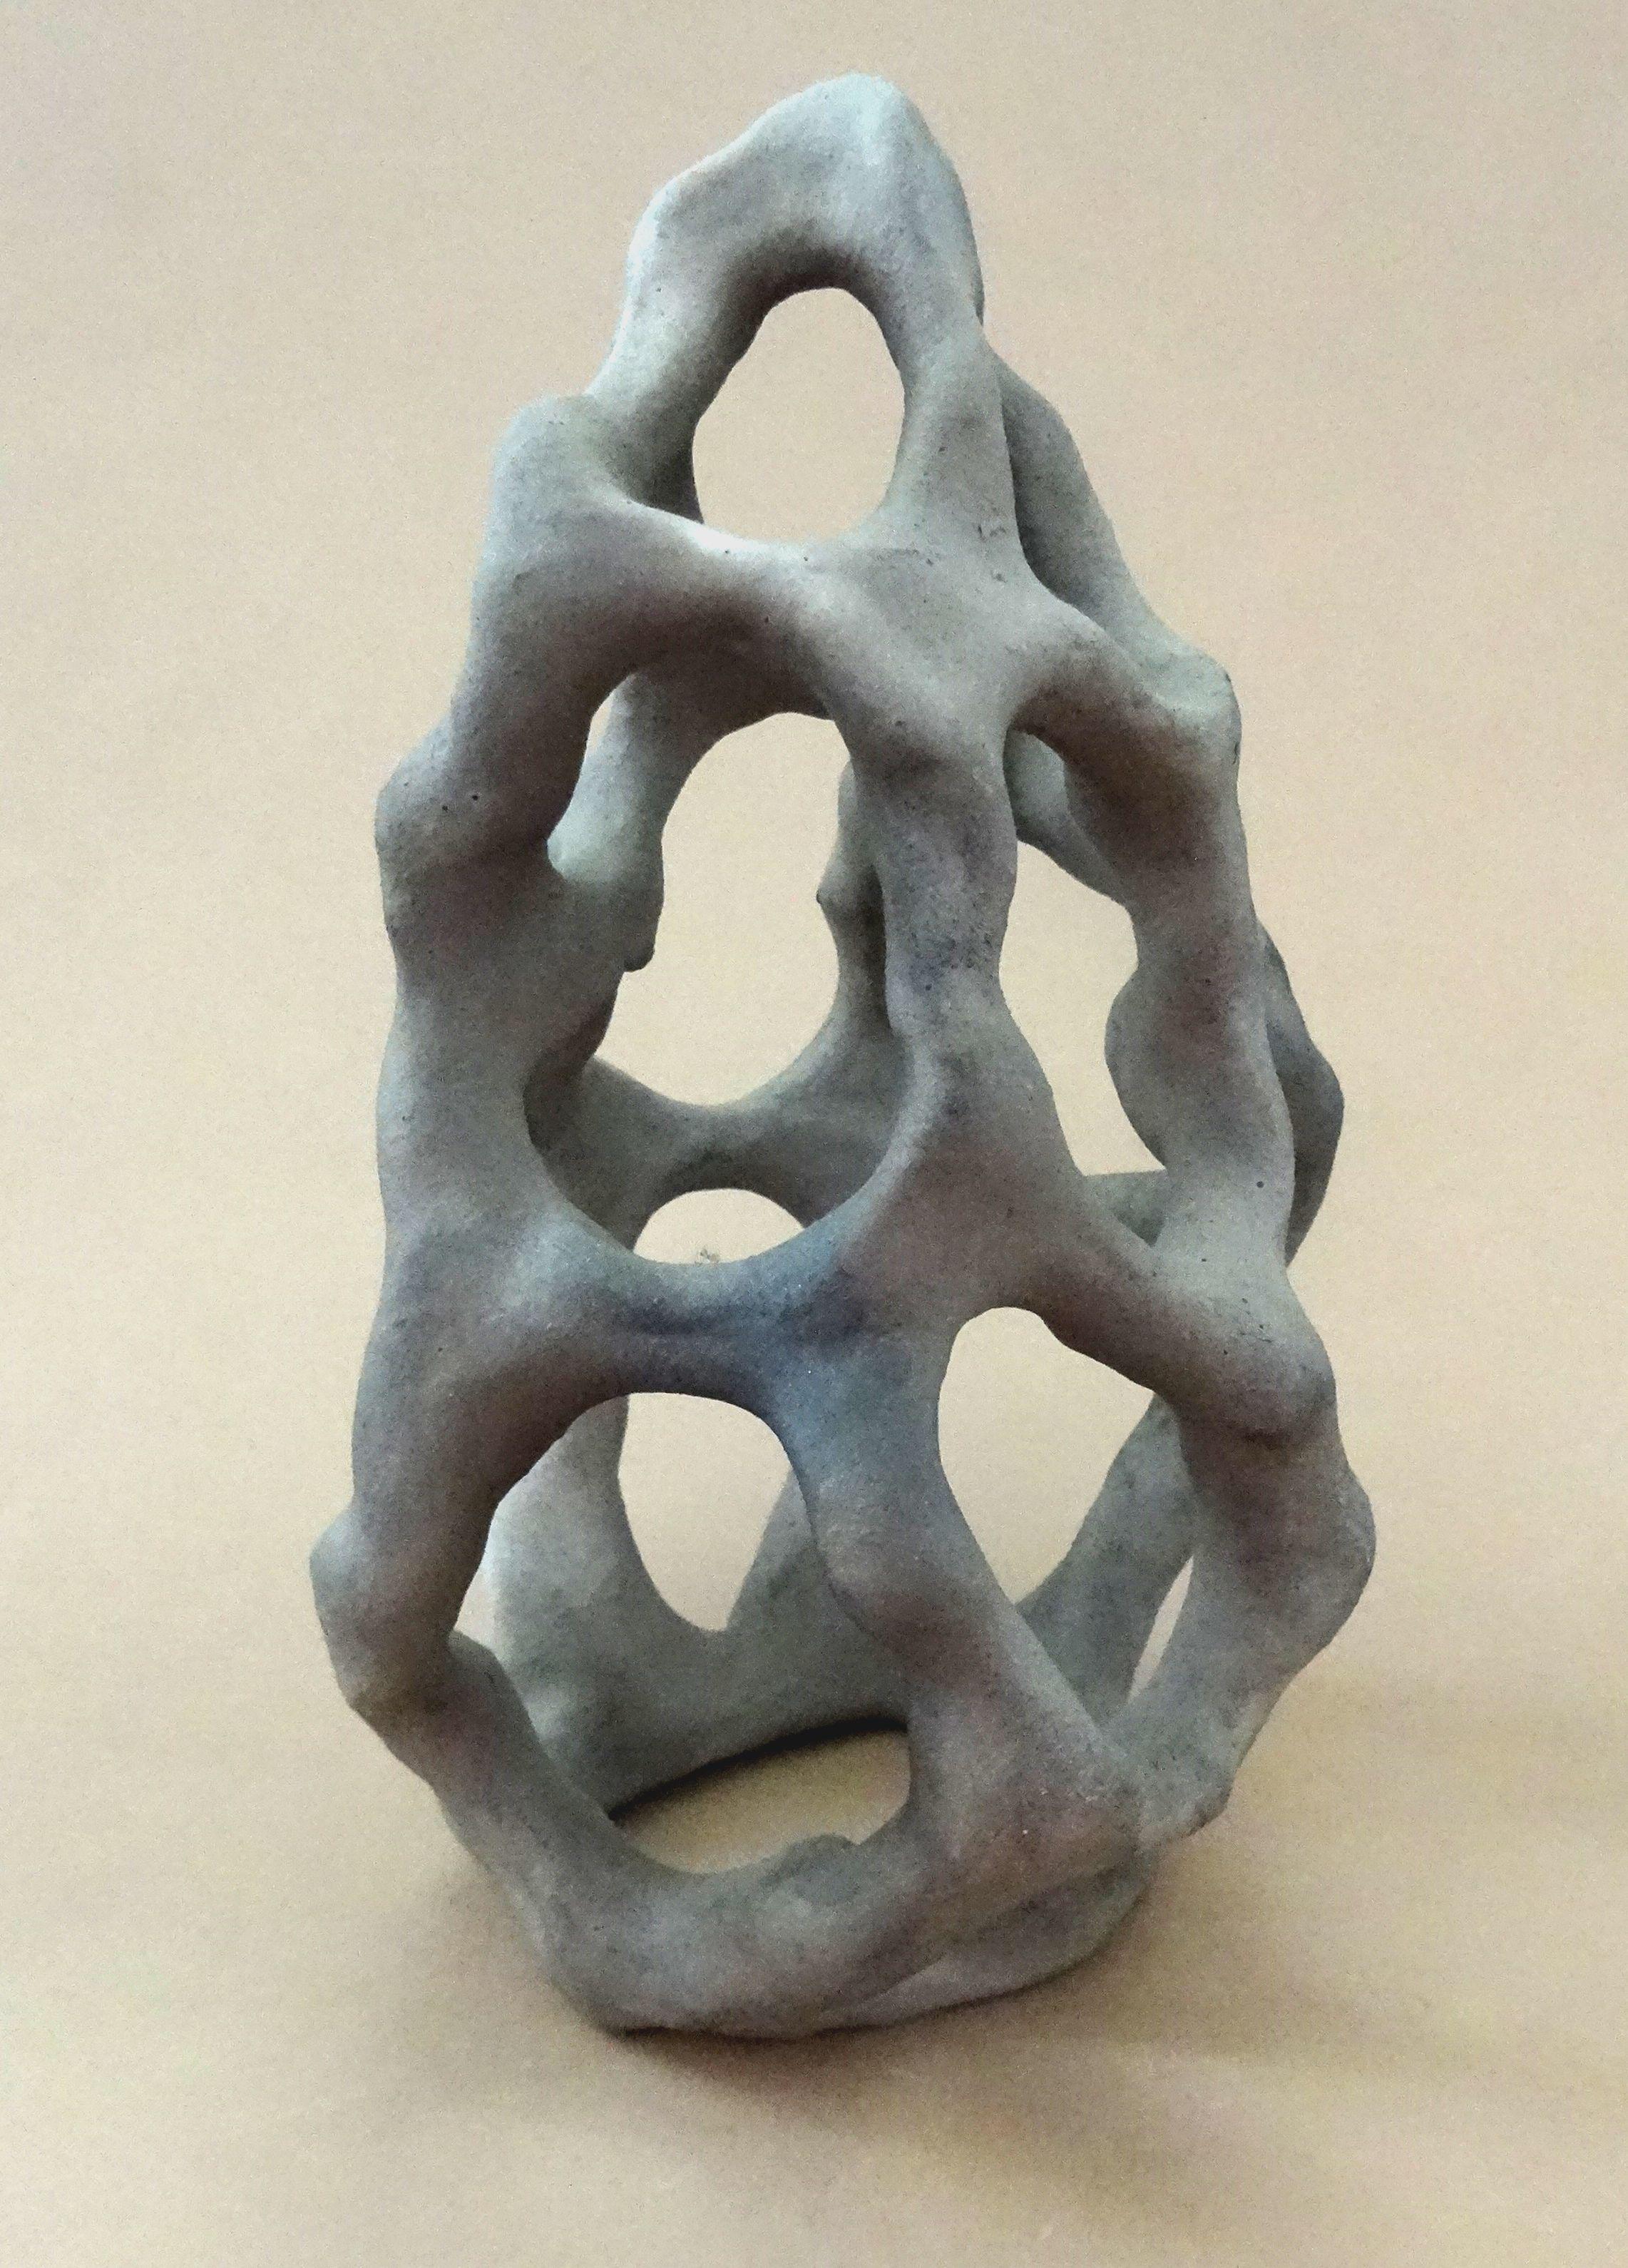 Infinity loops. Stone mass h 18, 5 cm - Sculpture by Elina Titane 